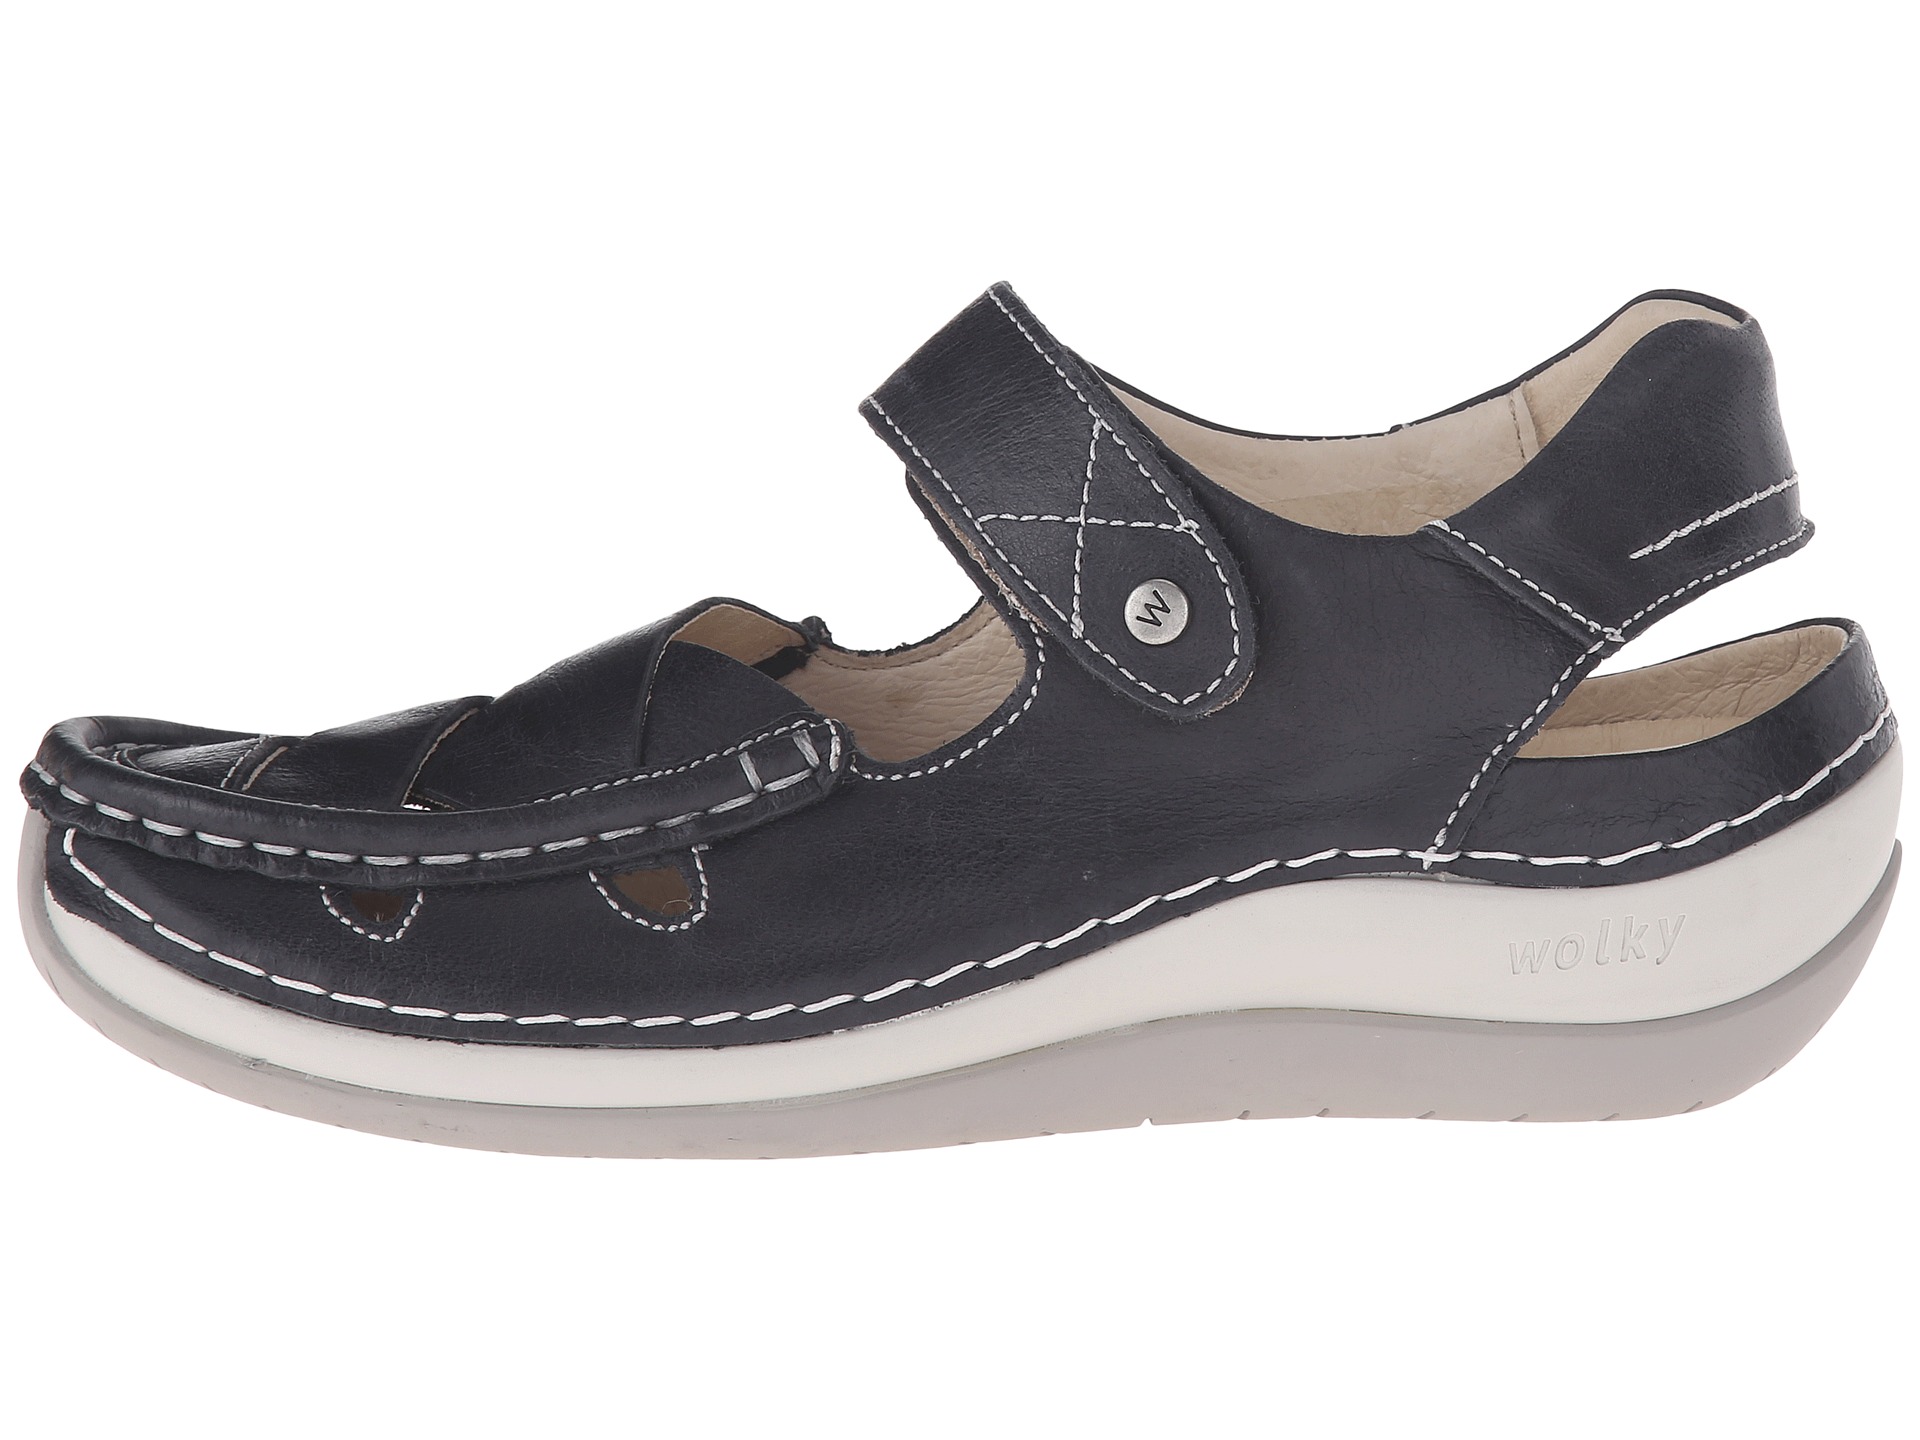 Wolky Venture Black - Zappos.com Free Shipping BOTH Ways